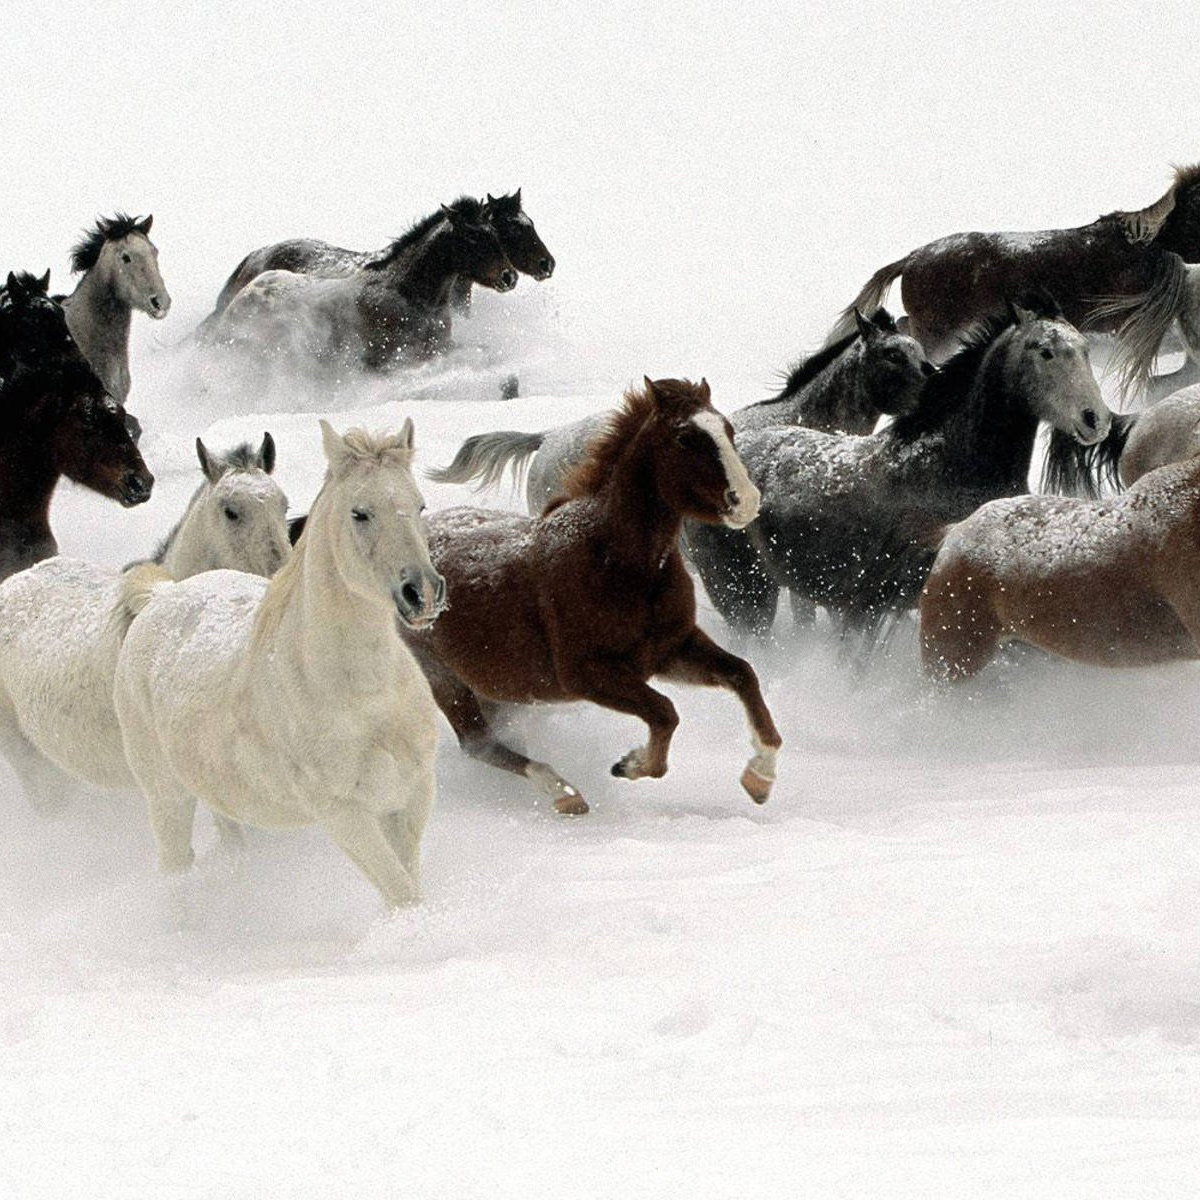 horses are inherently designed for winter